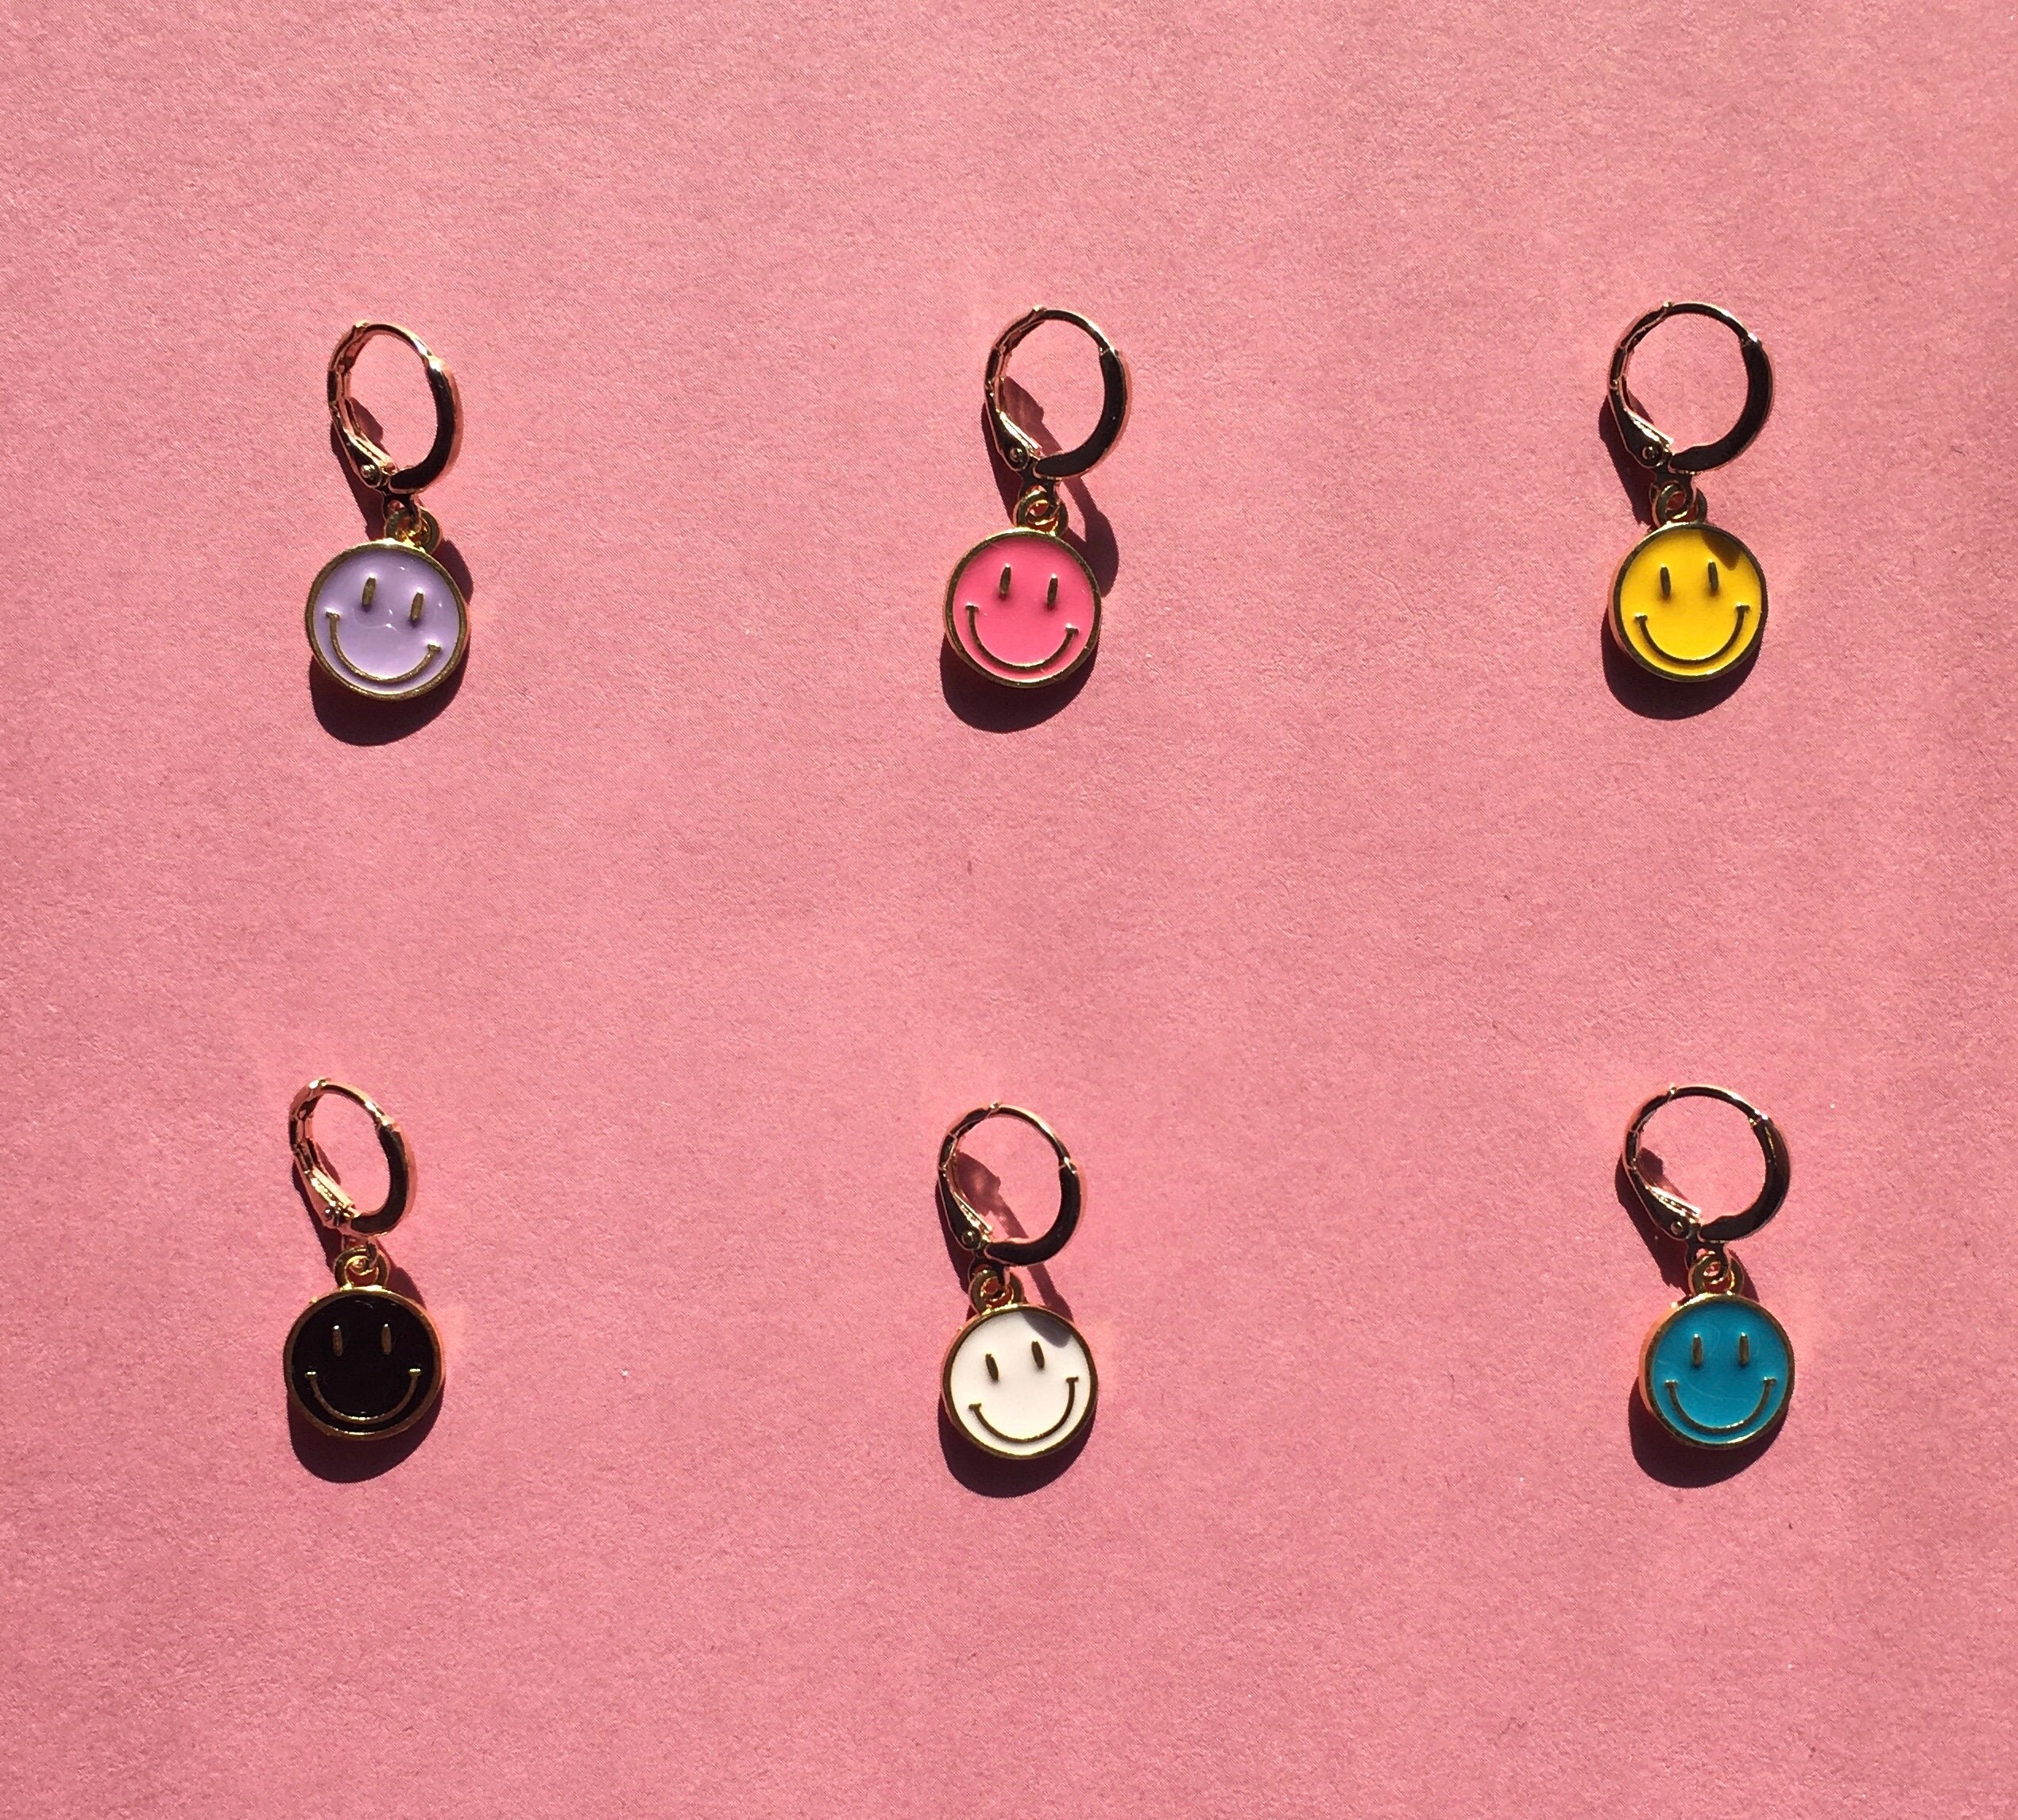 Smiley Face Flower Charms, Rainbow Charms, Charm Bracelets, Jewelry Making Charms, Cute Charms, Unique Charms, 5 per Pack